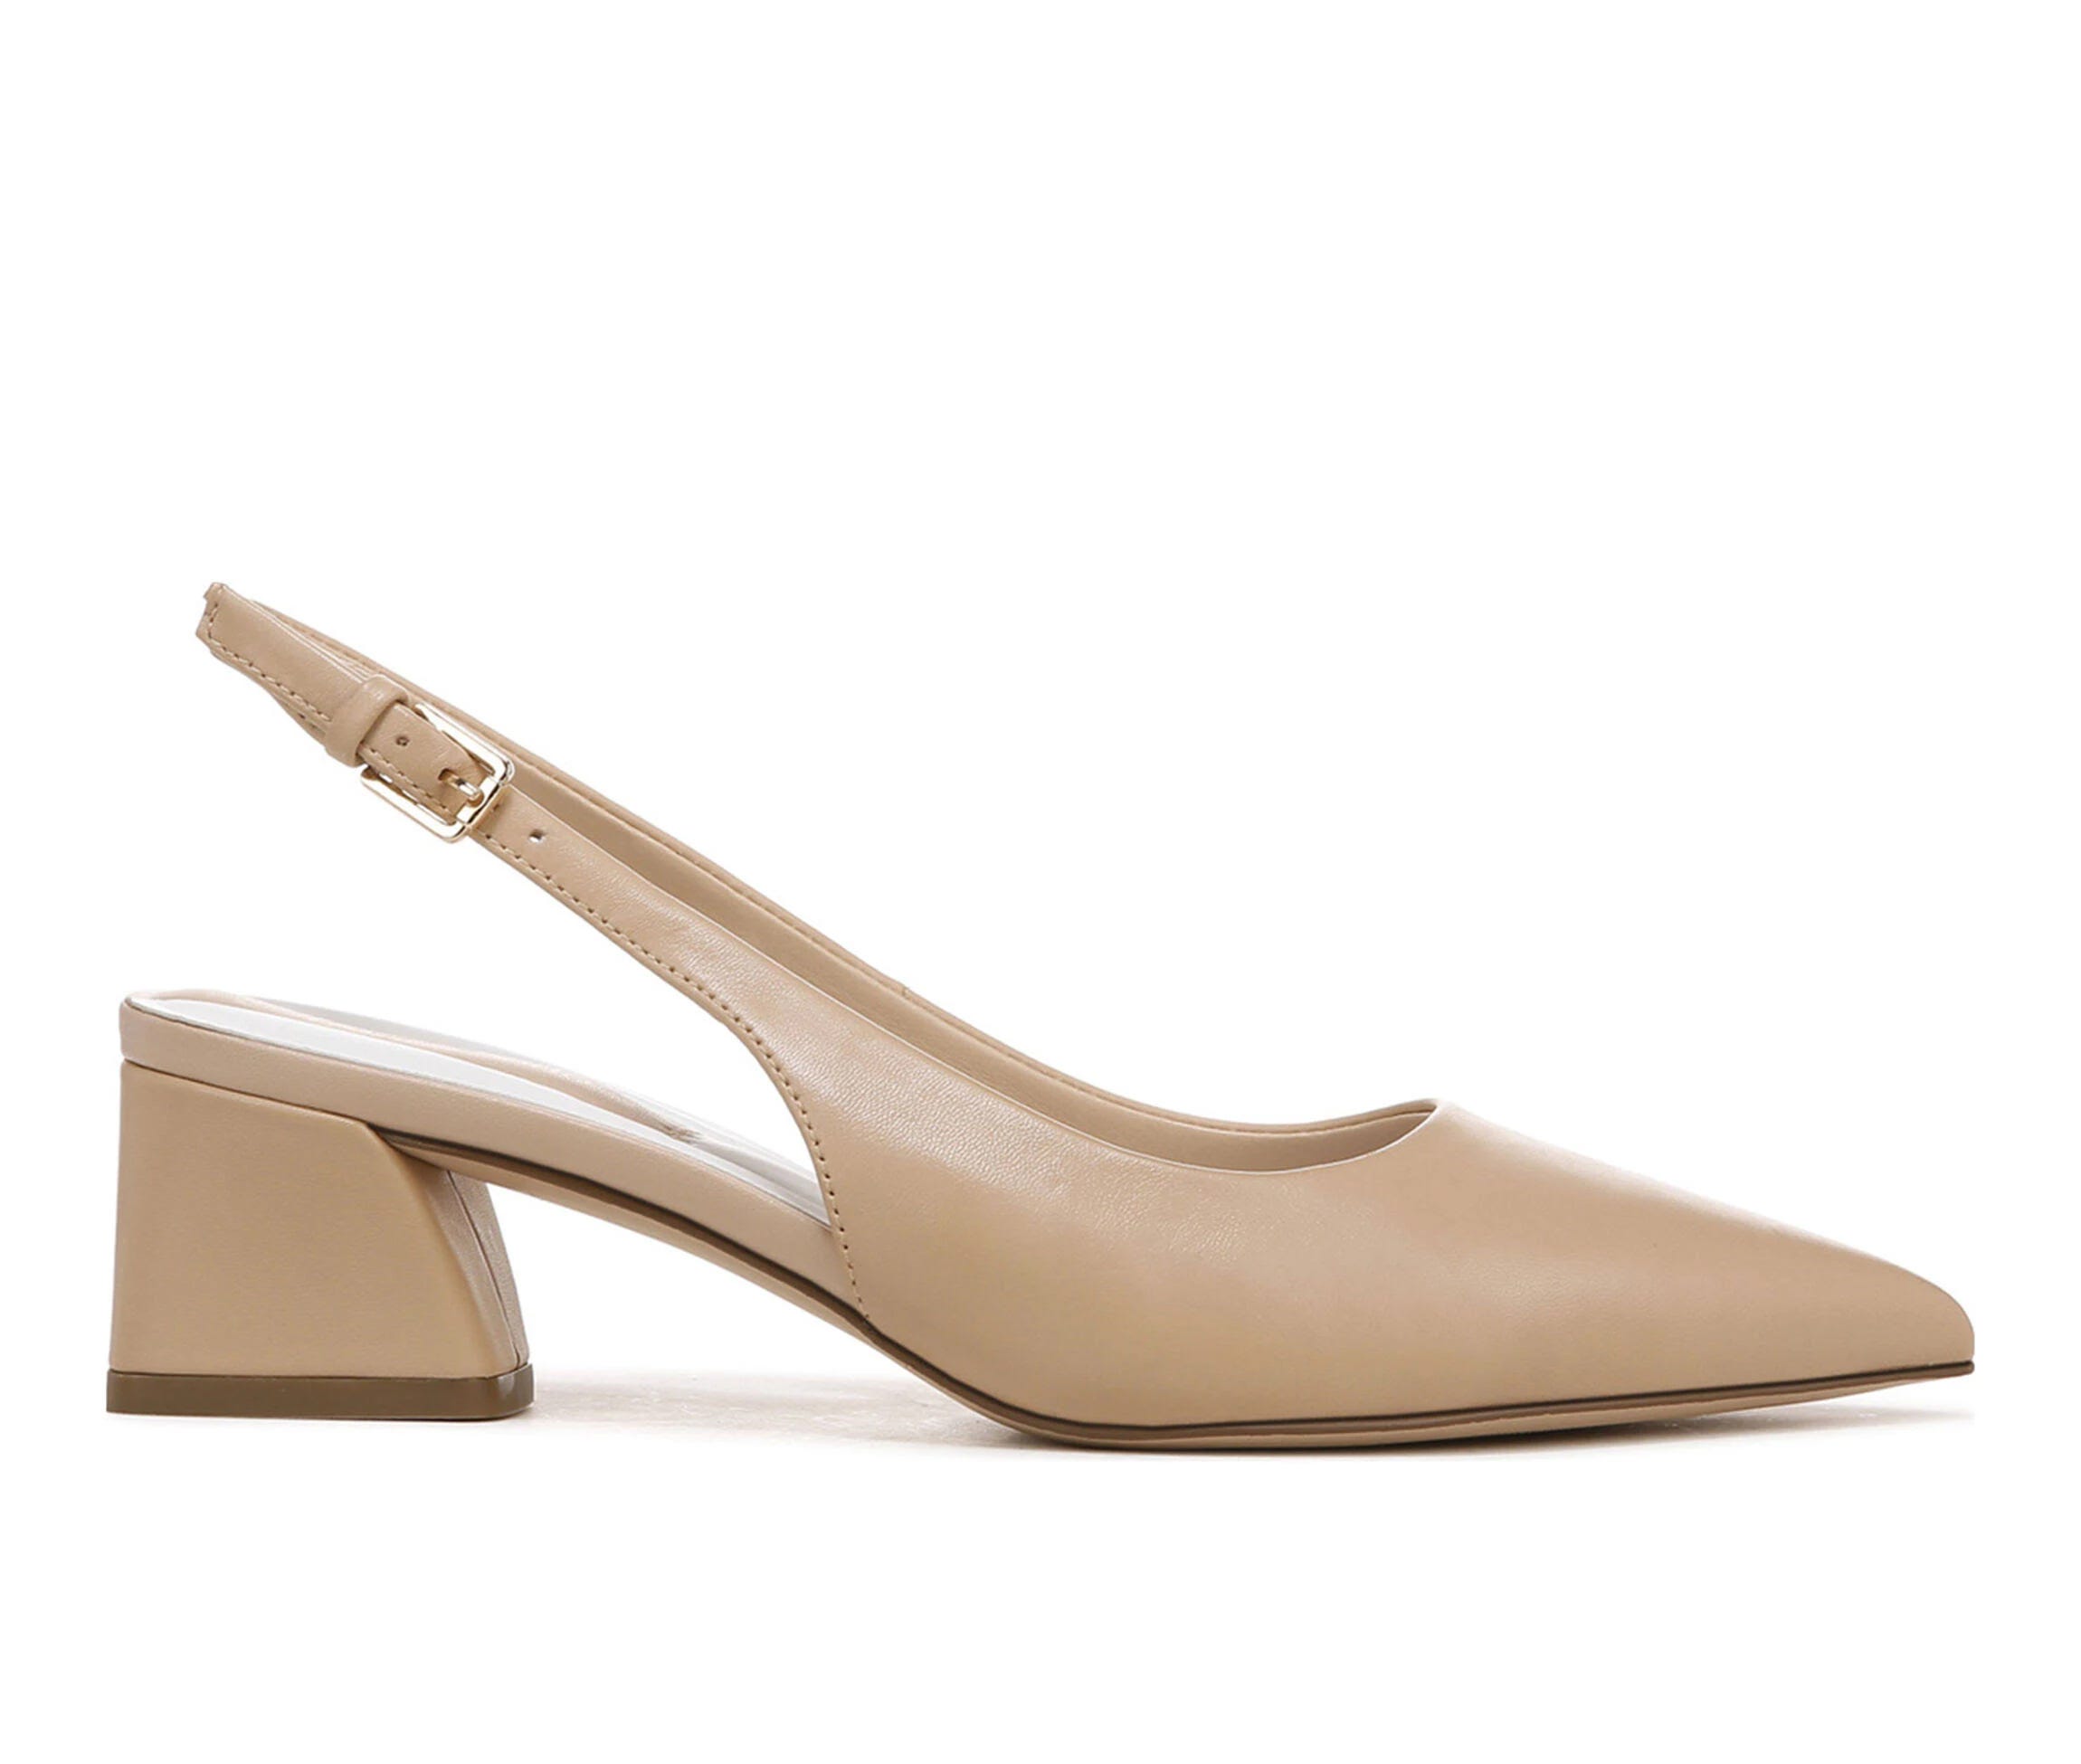 Recycled Nude Suede Strappy Pointed-Toe Pump with InFORMA Comfort | Image